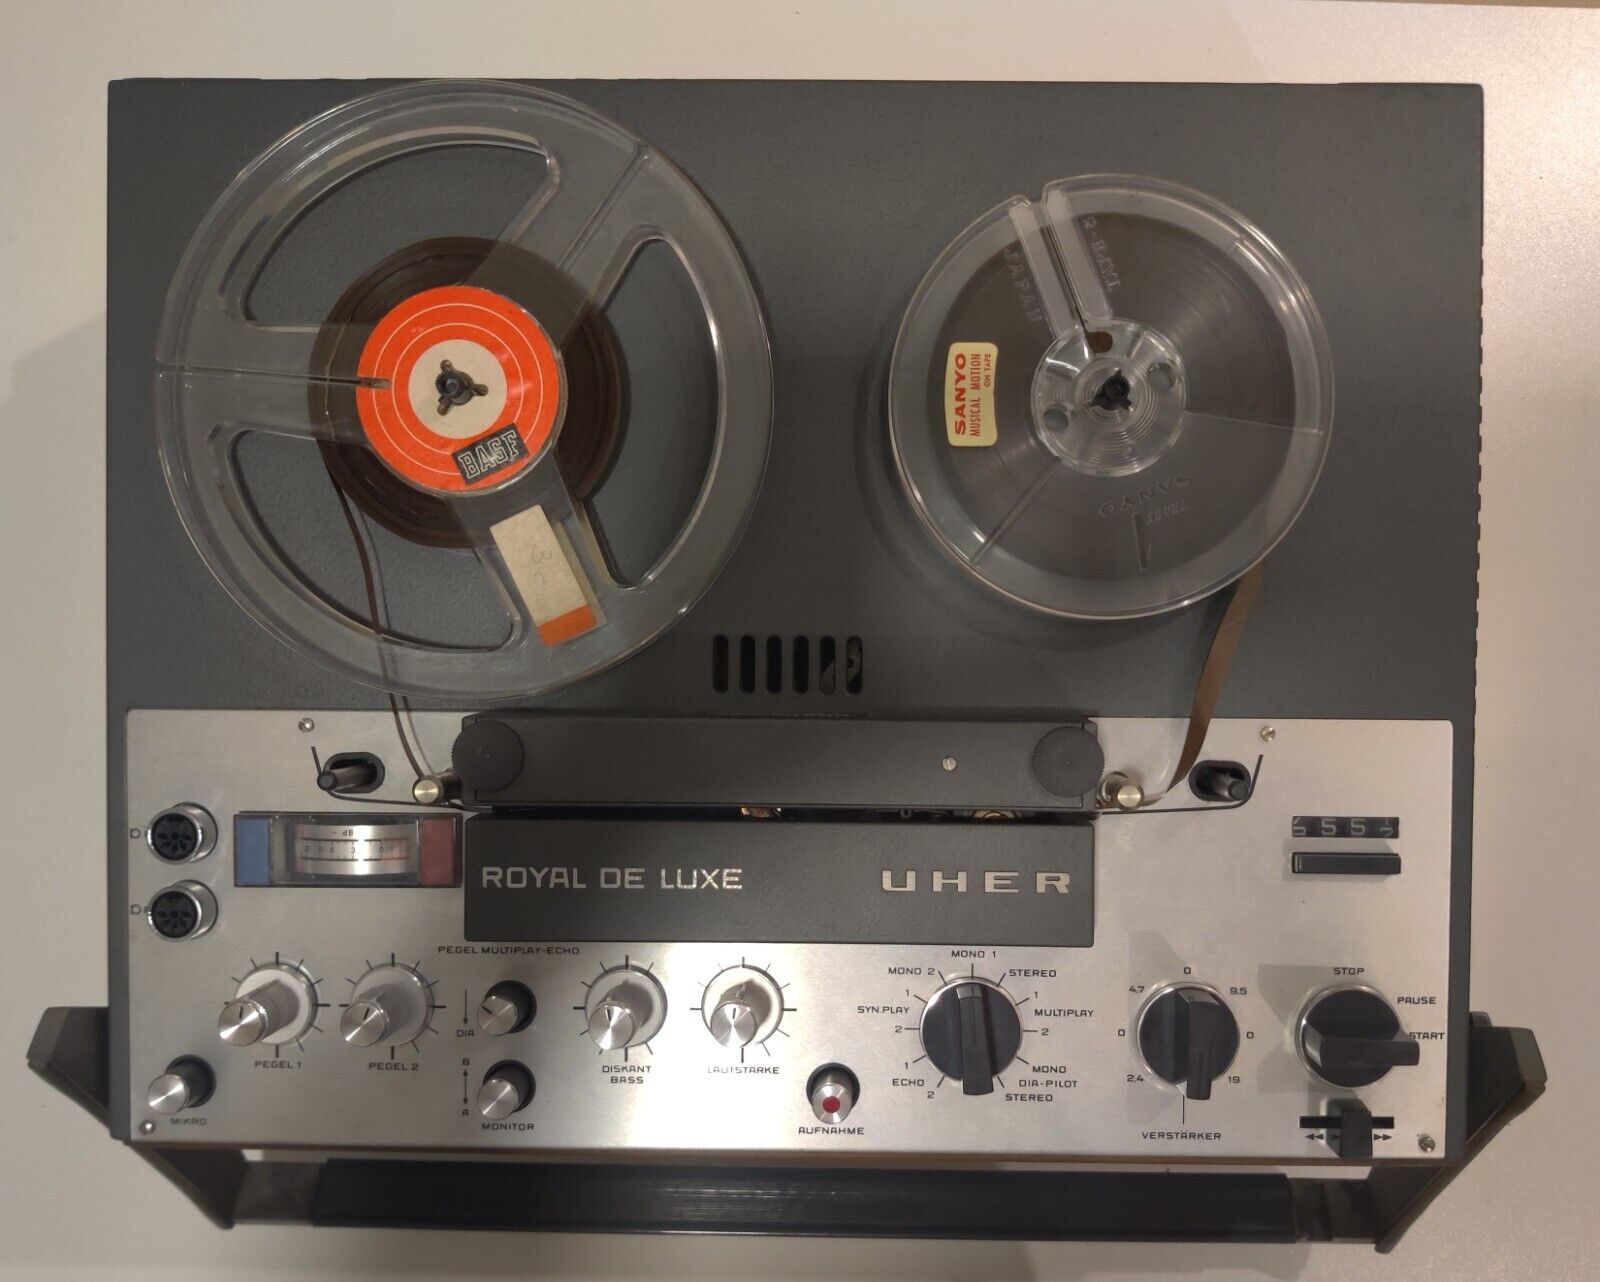 UHER ROYAL DELUXE TYPE 2944 REEL TO REEL TAPE RECORDER GERMANY 1960s